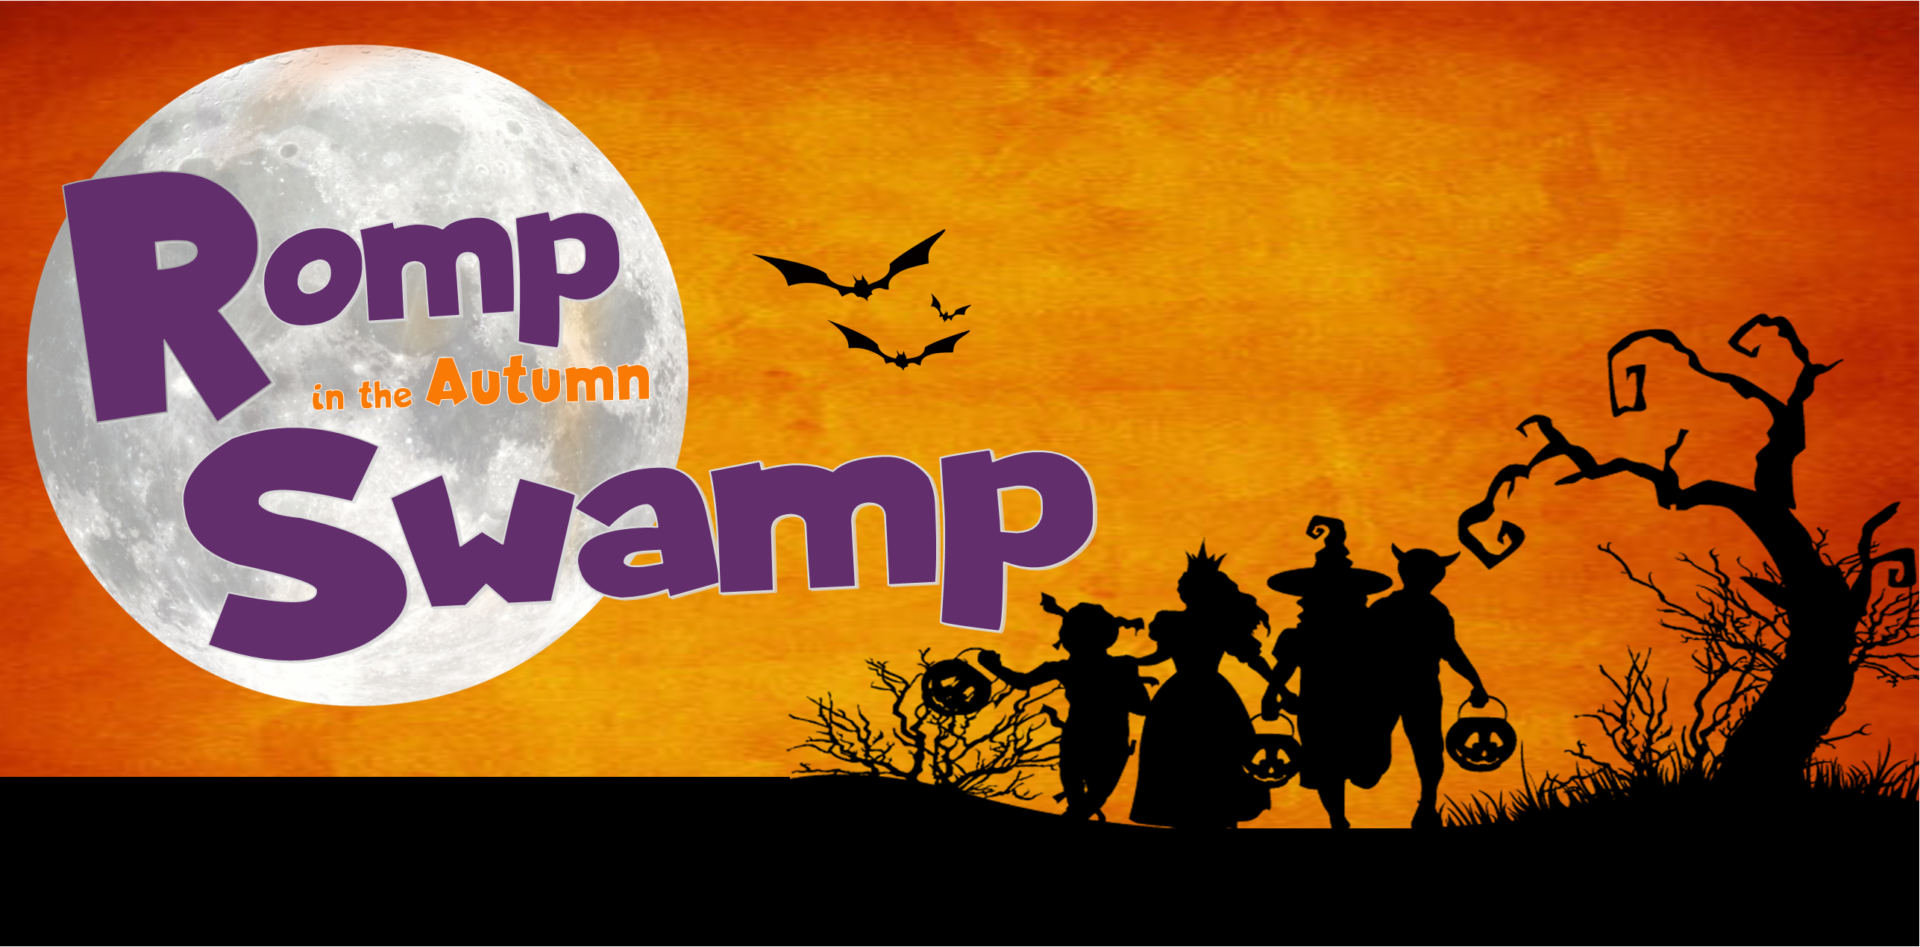 Romp in the Swamp graphic